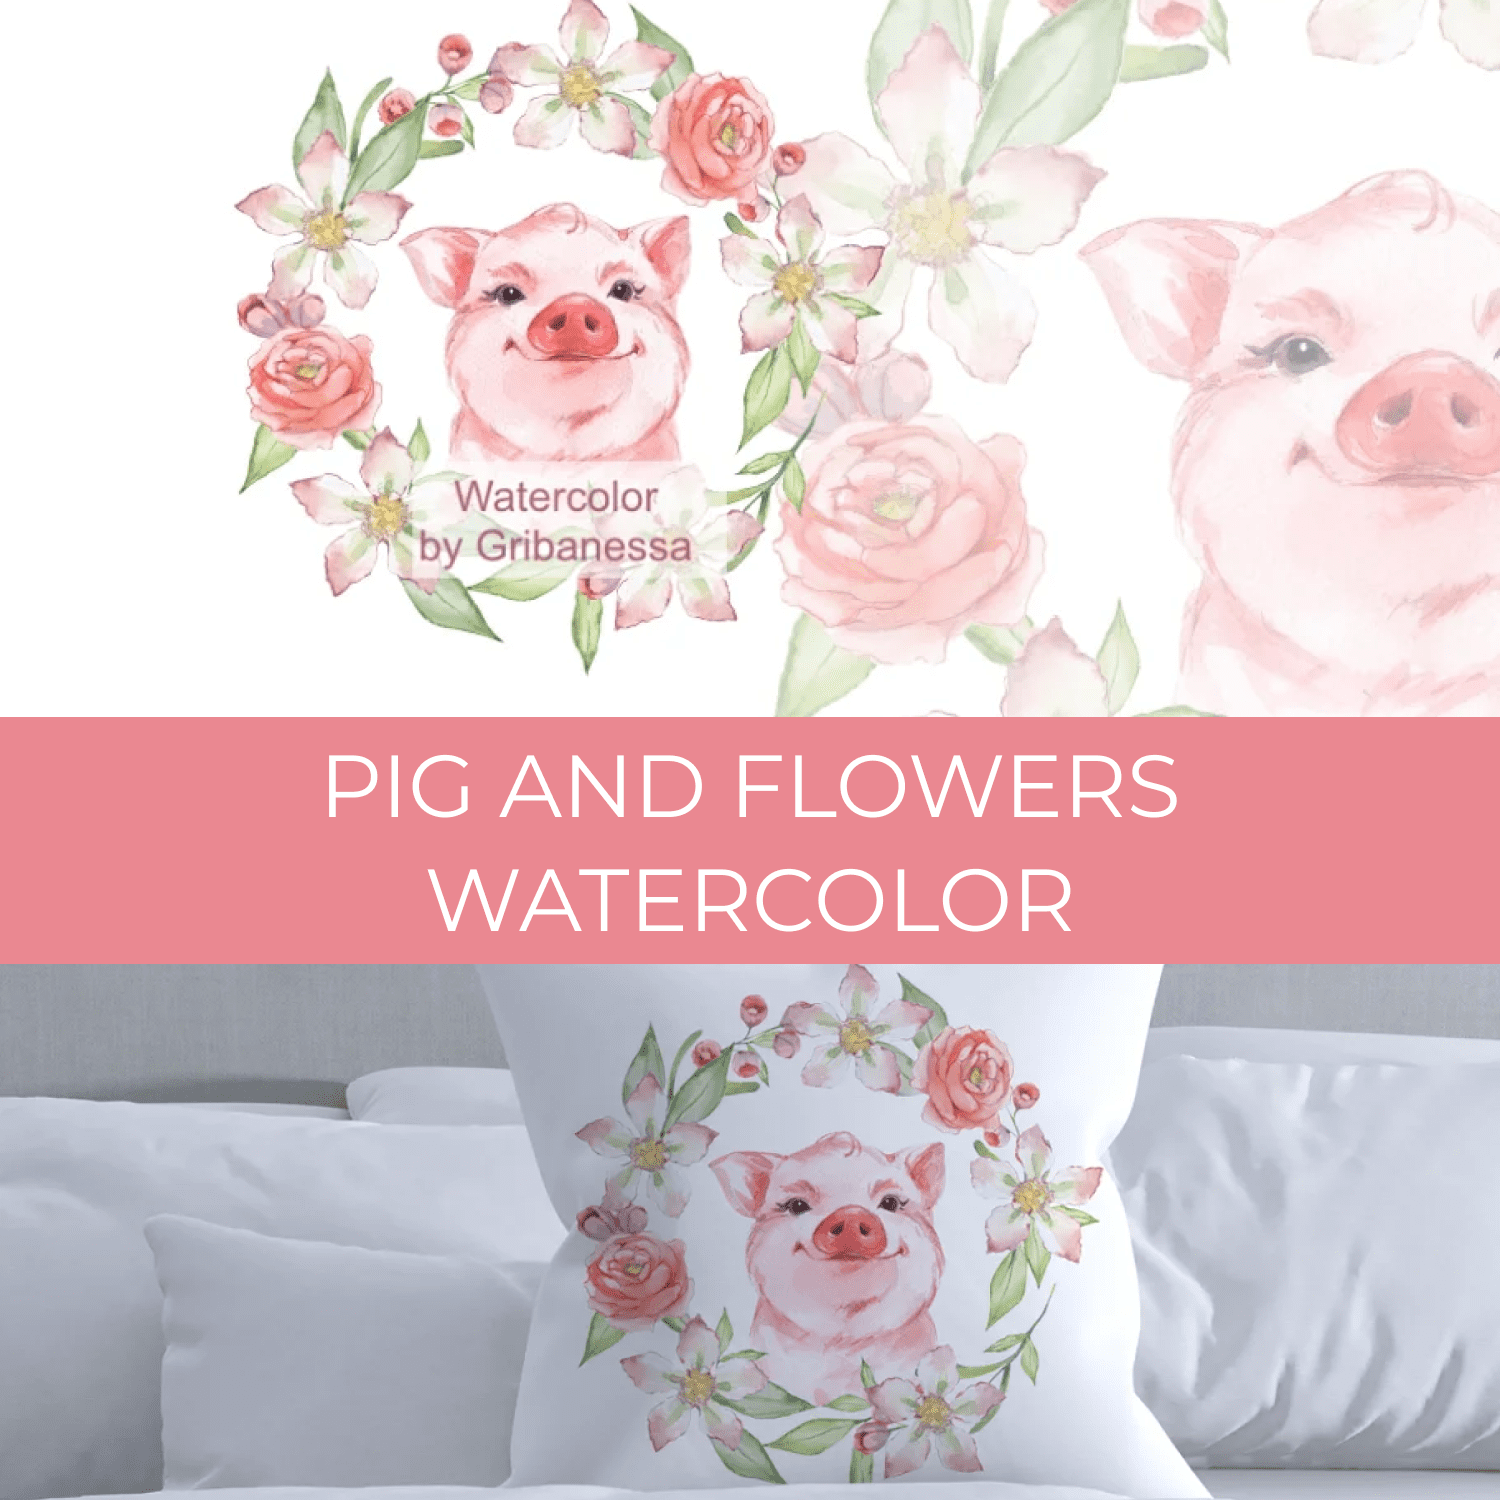 Pig and flowers. Watercolor cover.